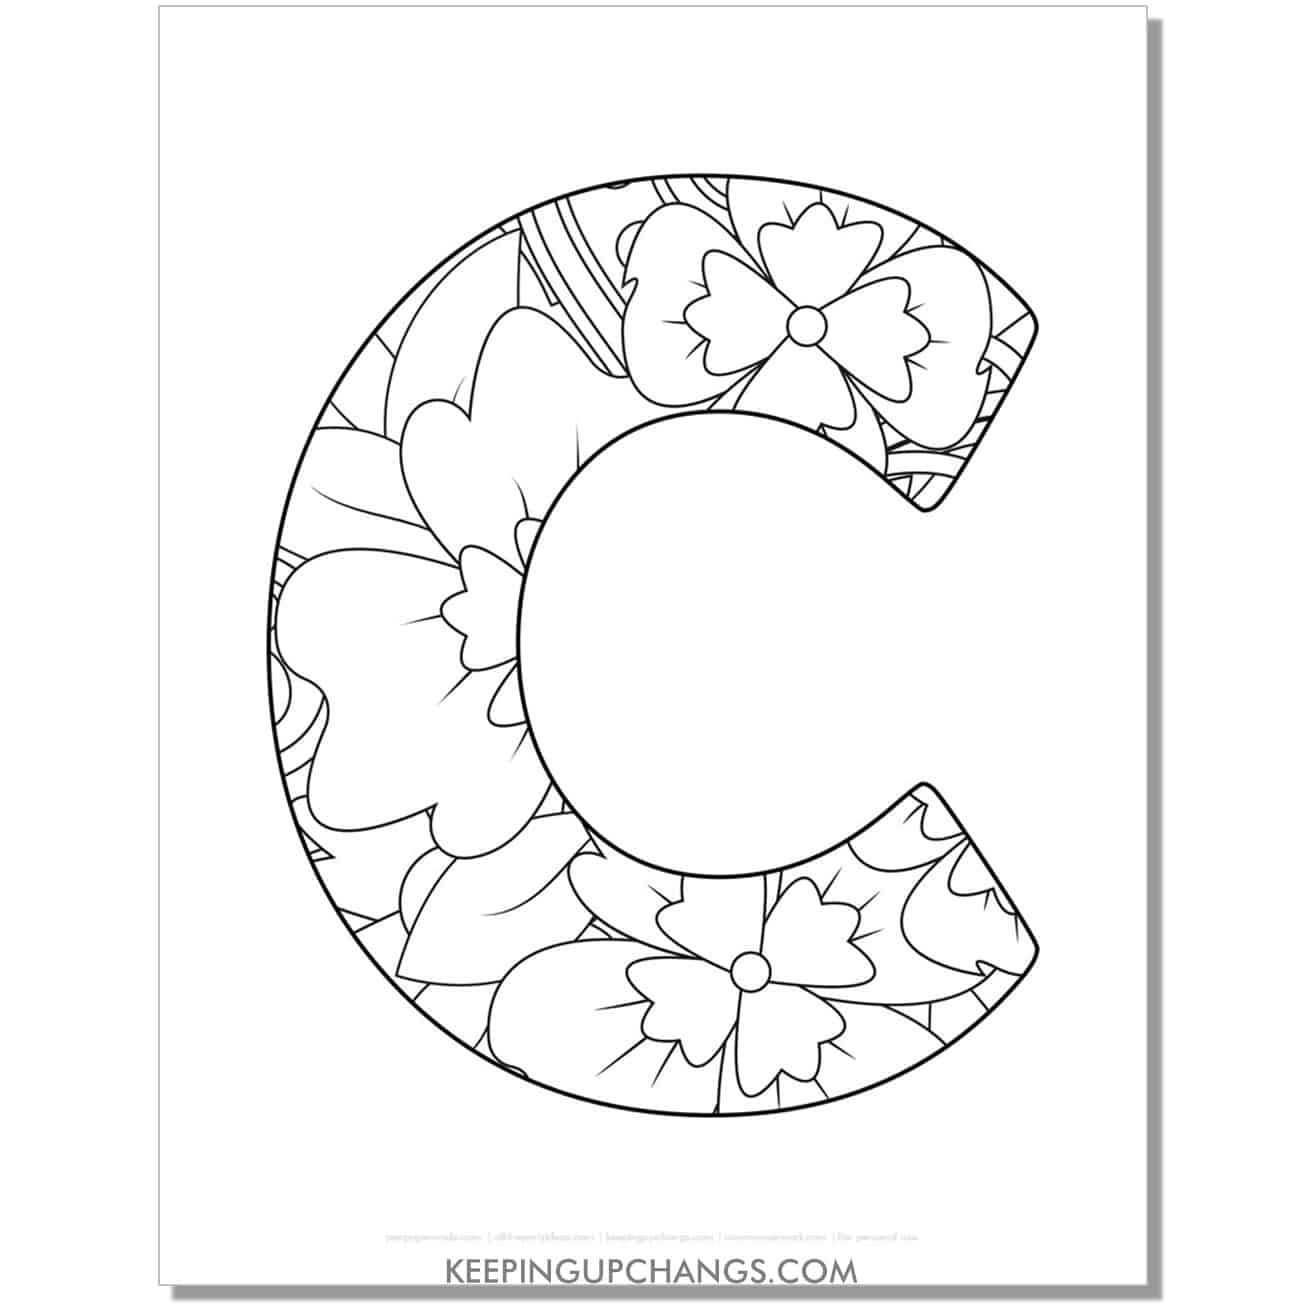 free letter c to color, complex mandala zentangle for adults.